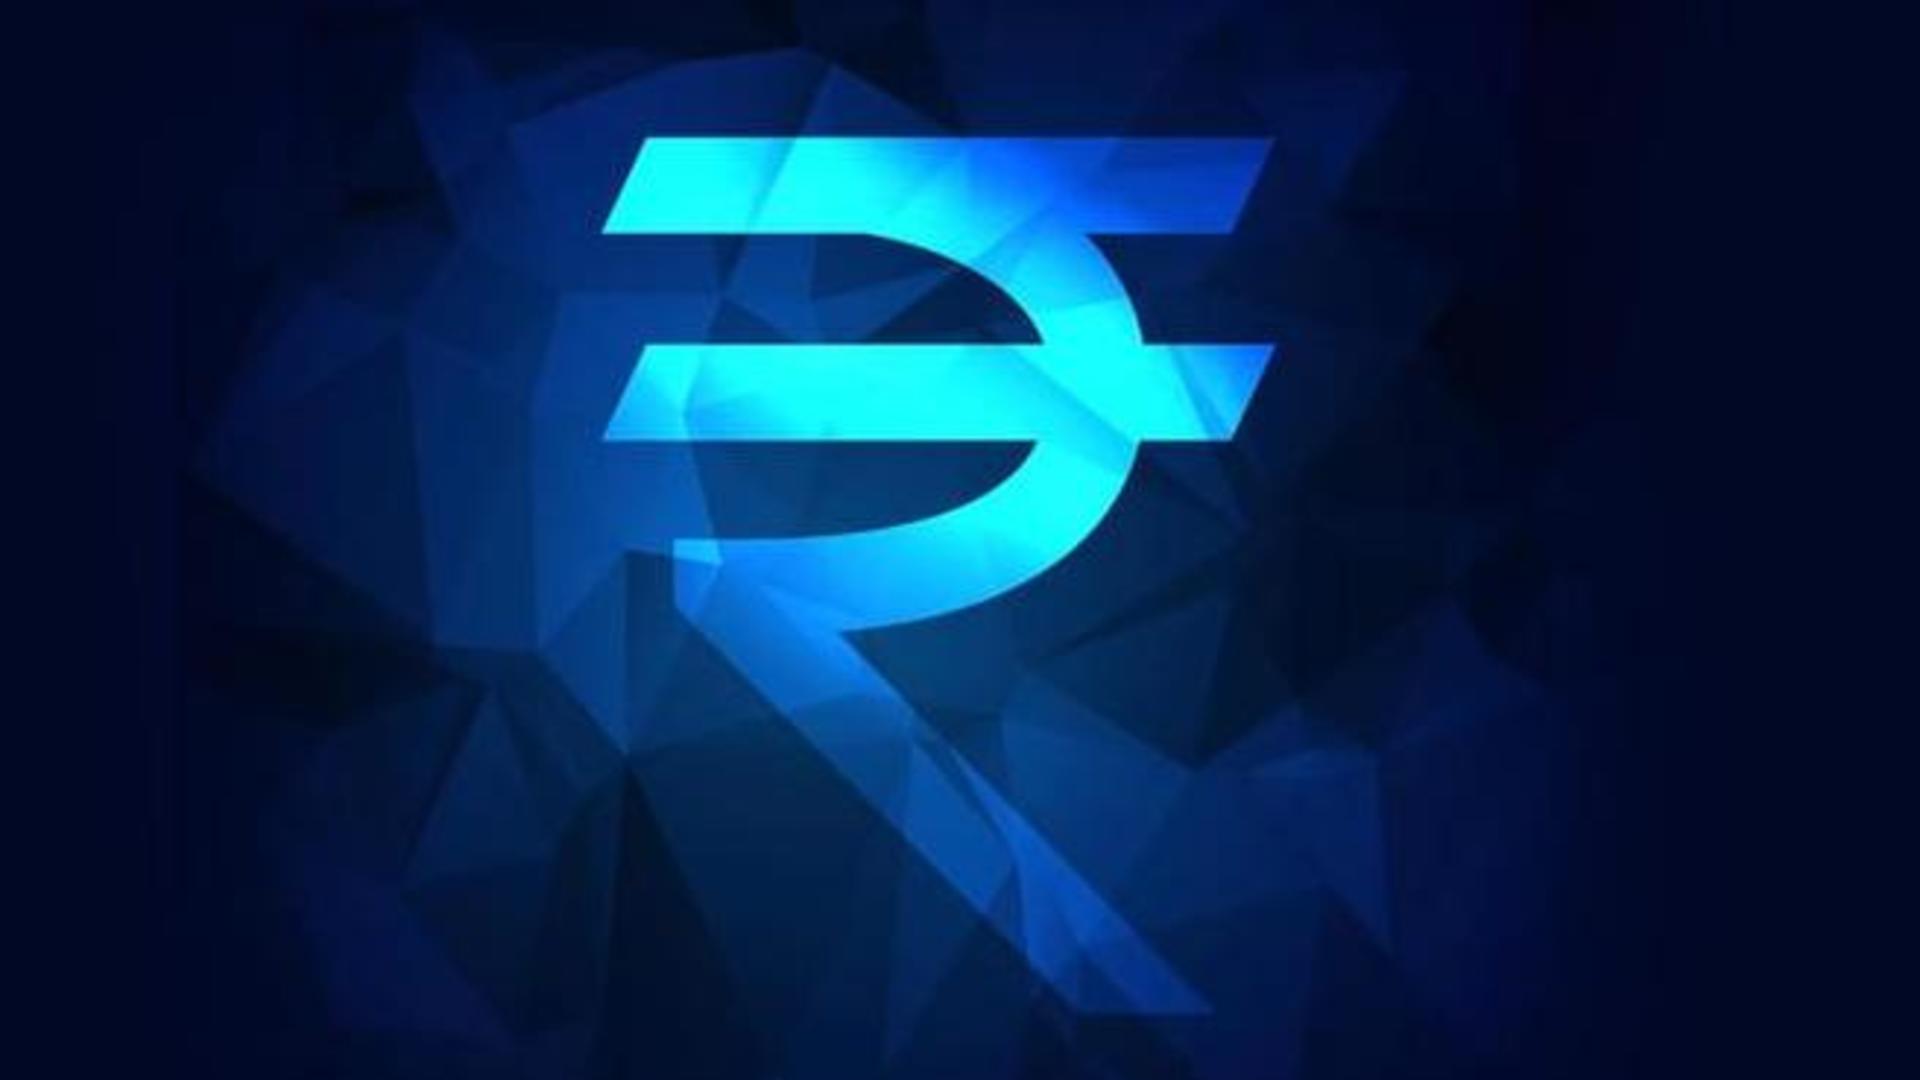 RBI's retail digital rupee is now live in 4 cities